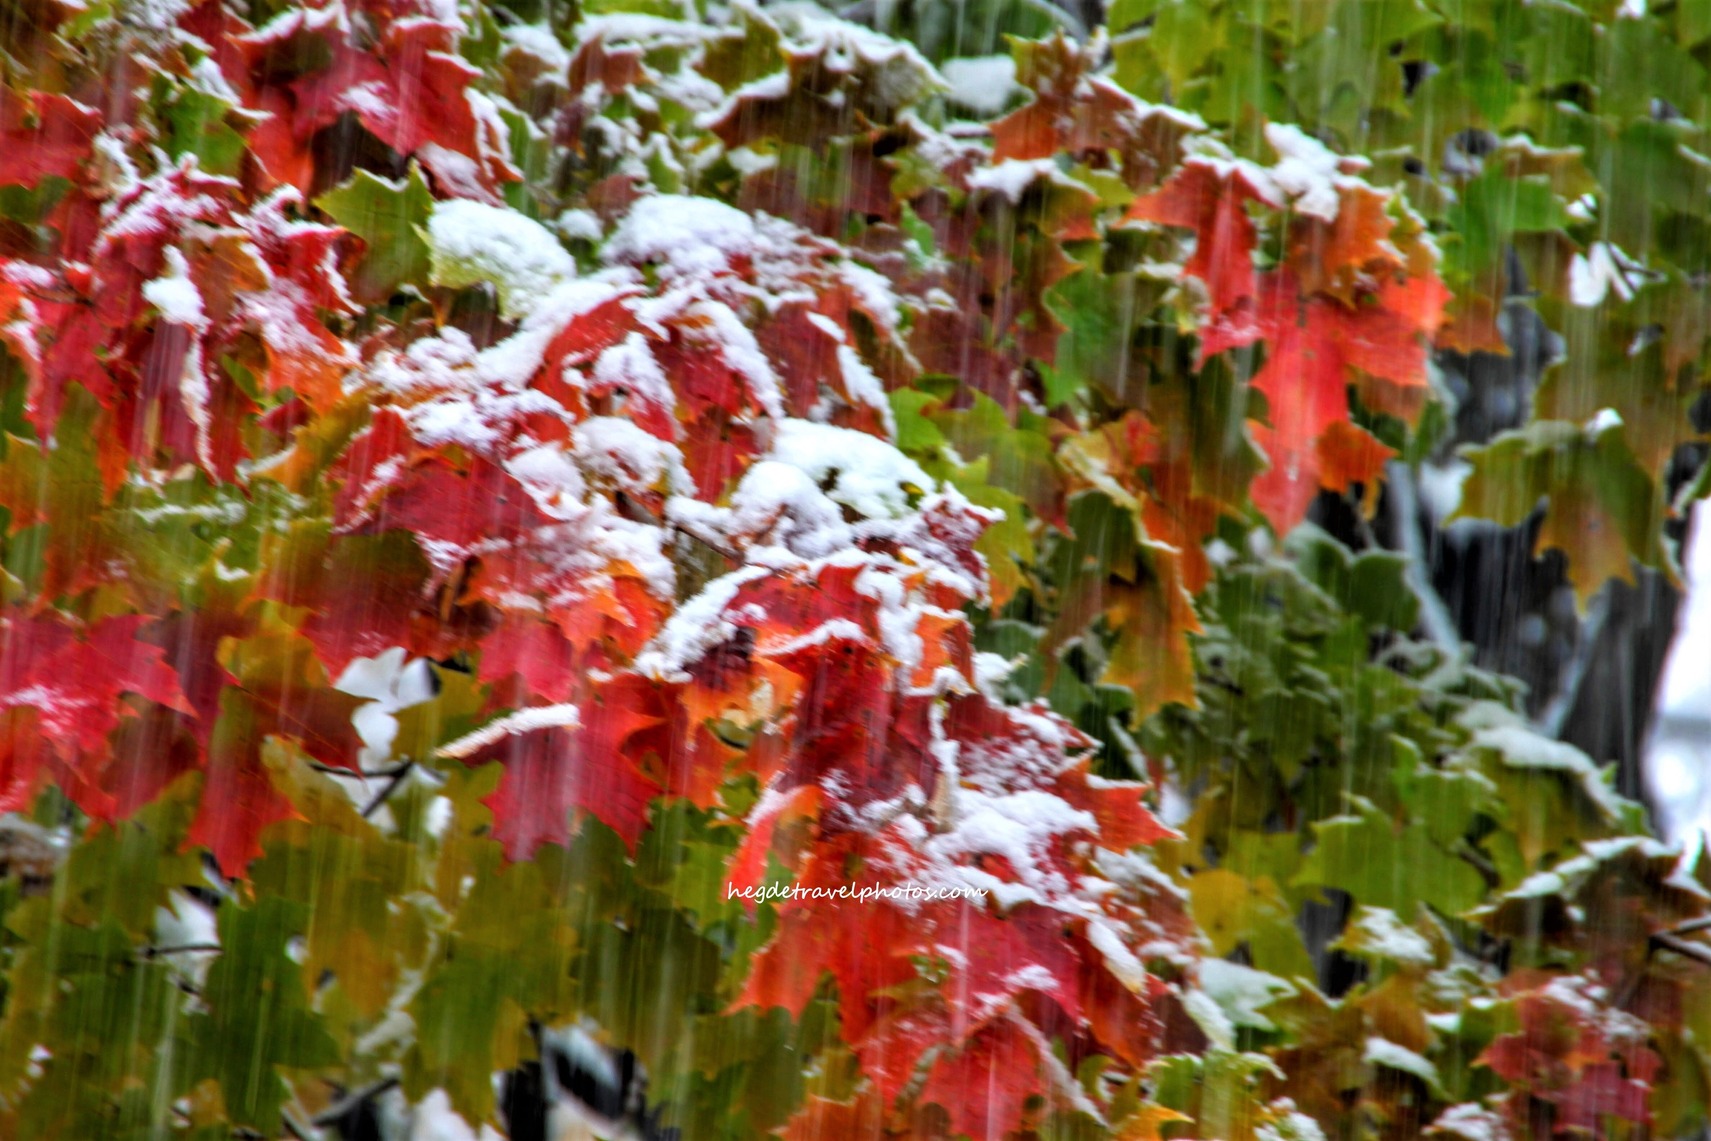 Falling Snow on Autumn Leaves